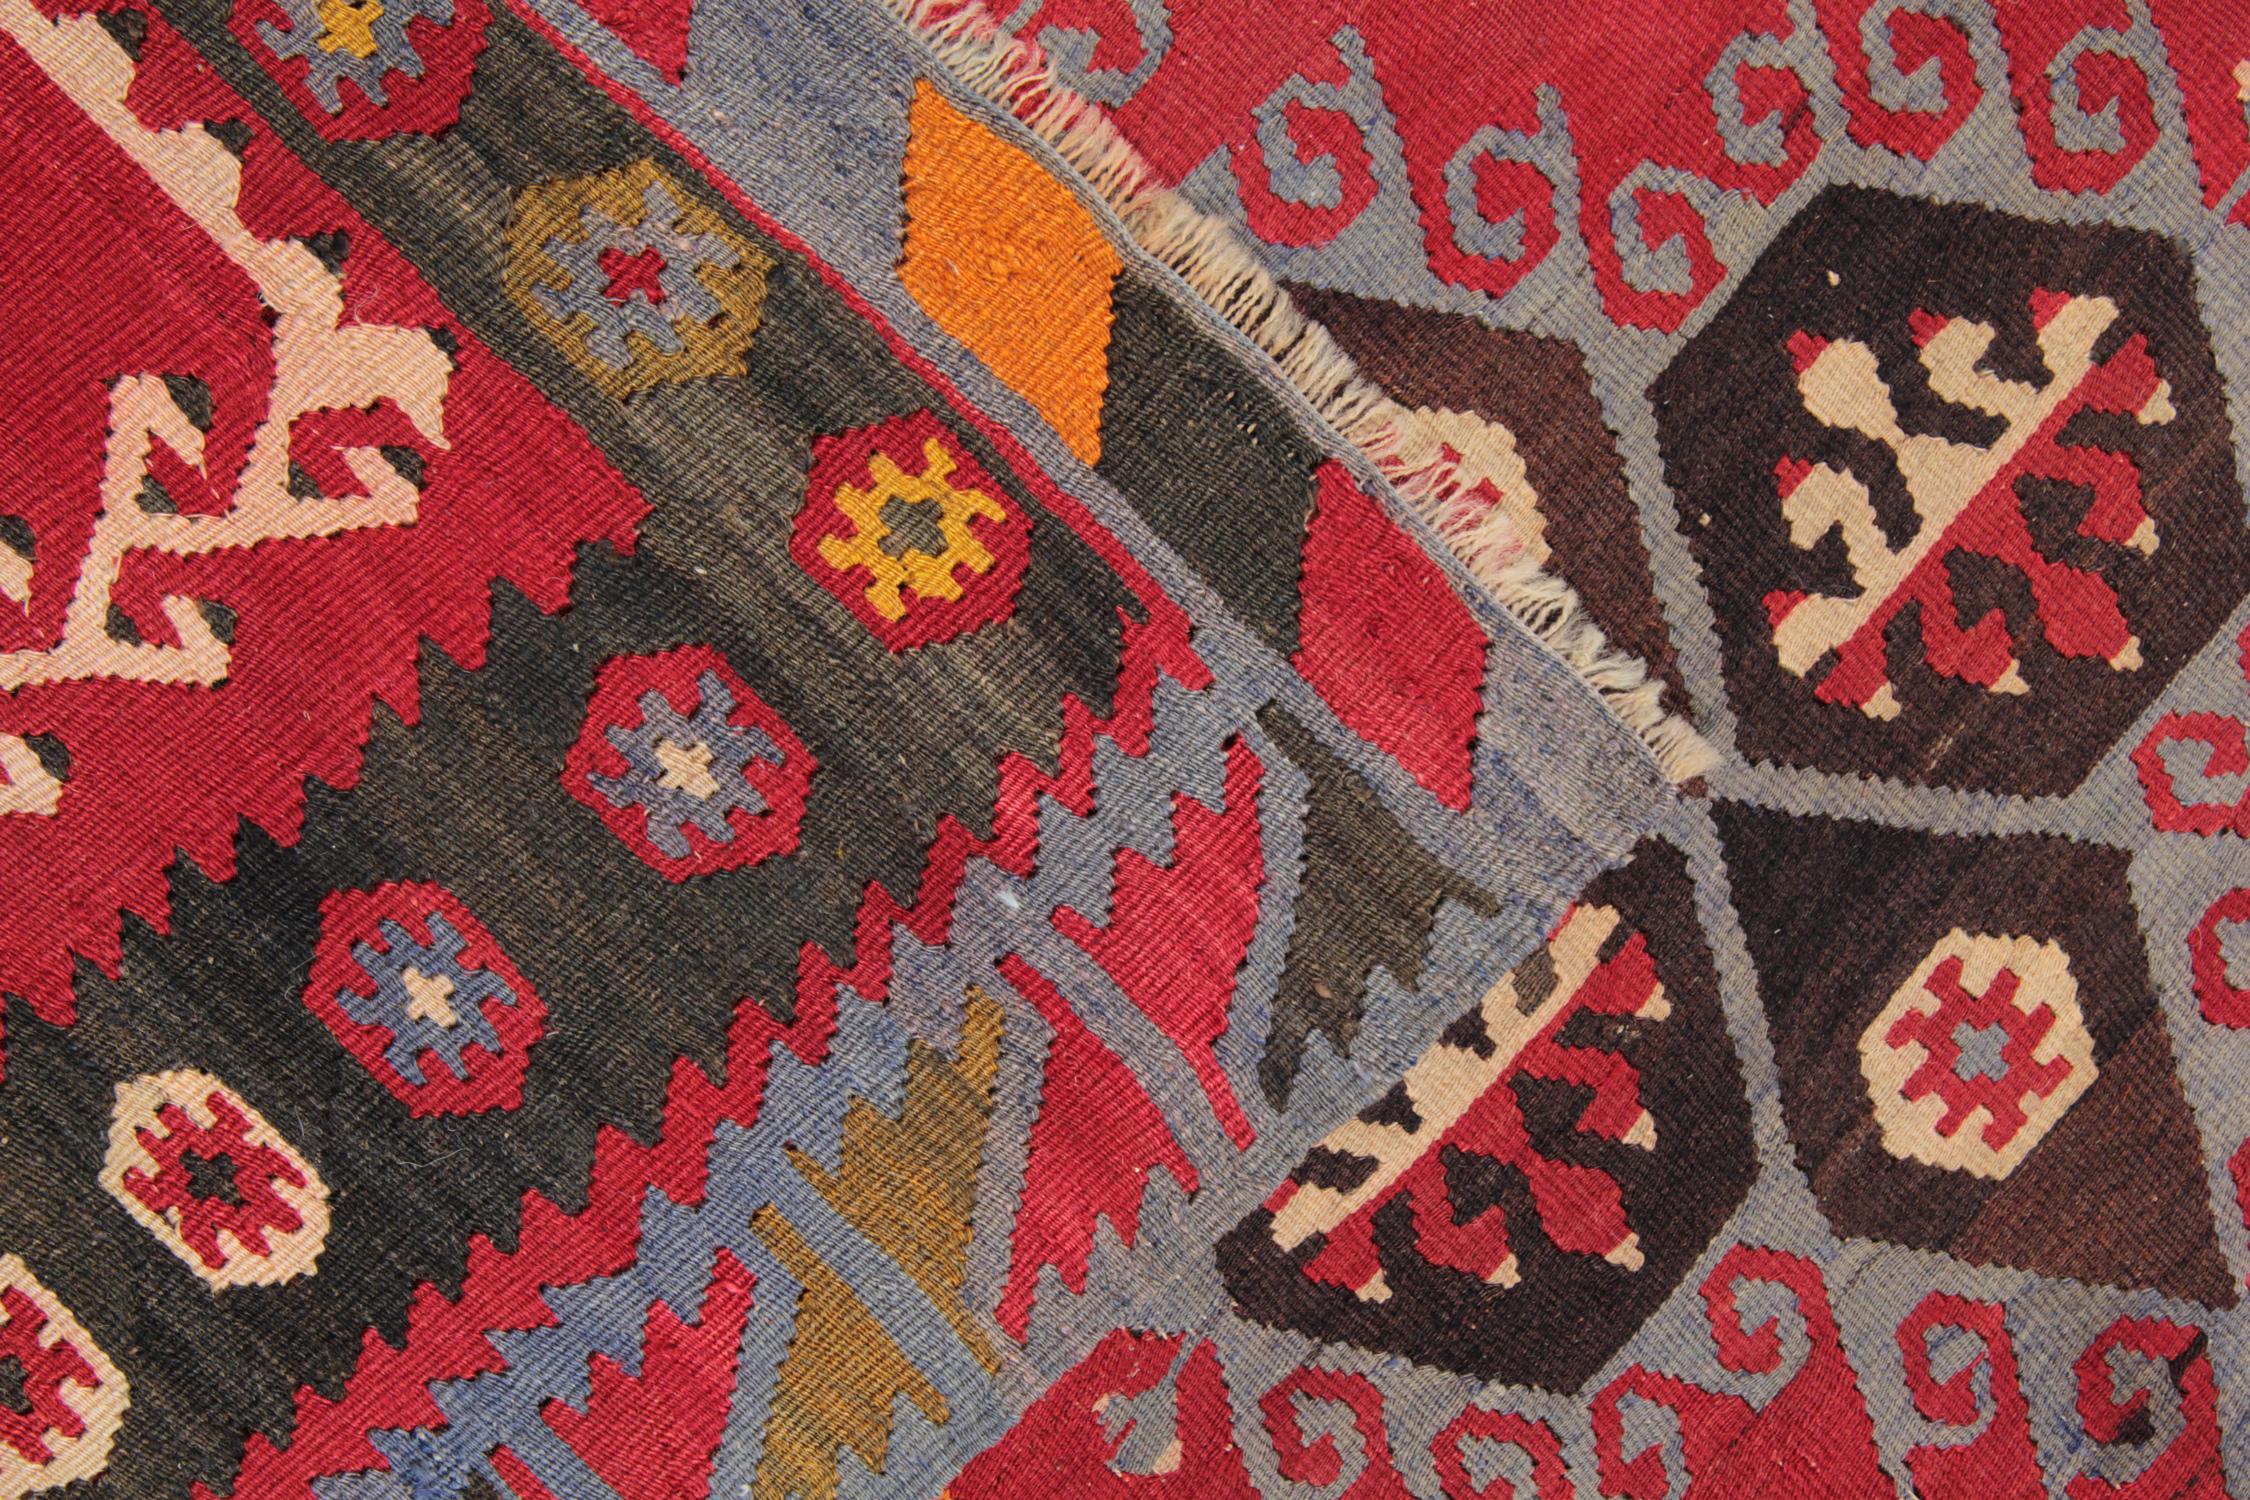 Vegetable Dyed Antique Turkish Kilim Red Rug, Hand-Made and Hand-Dyed in Anatolia 